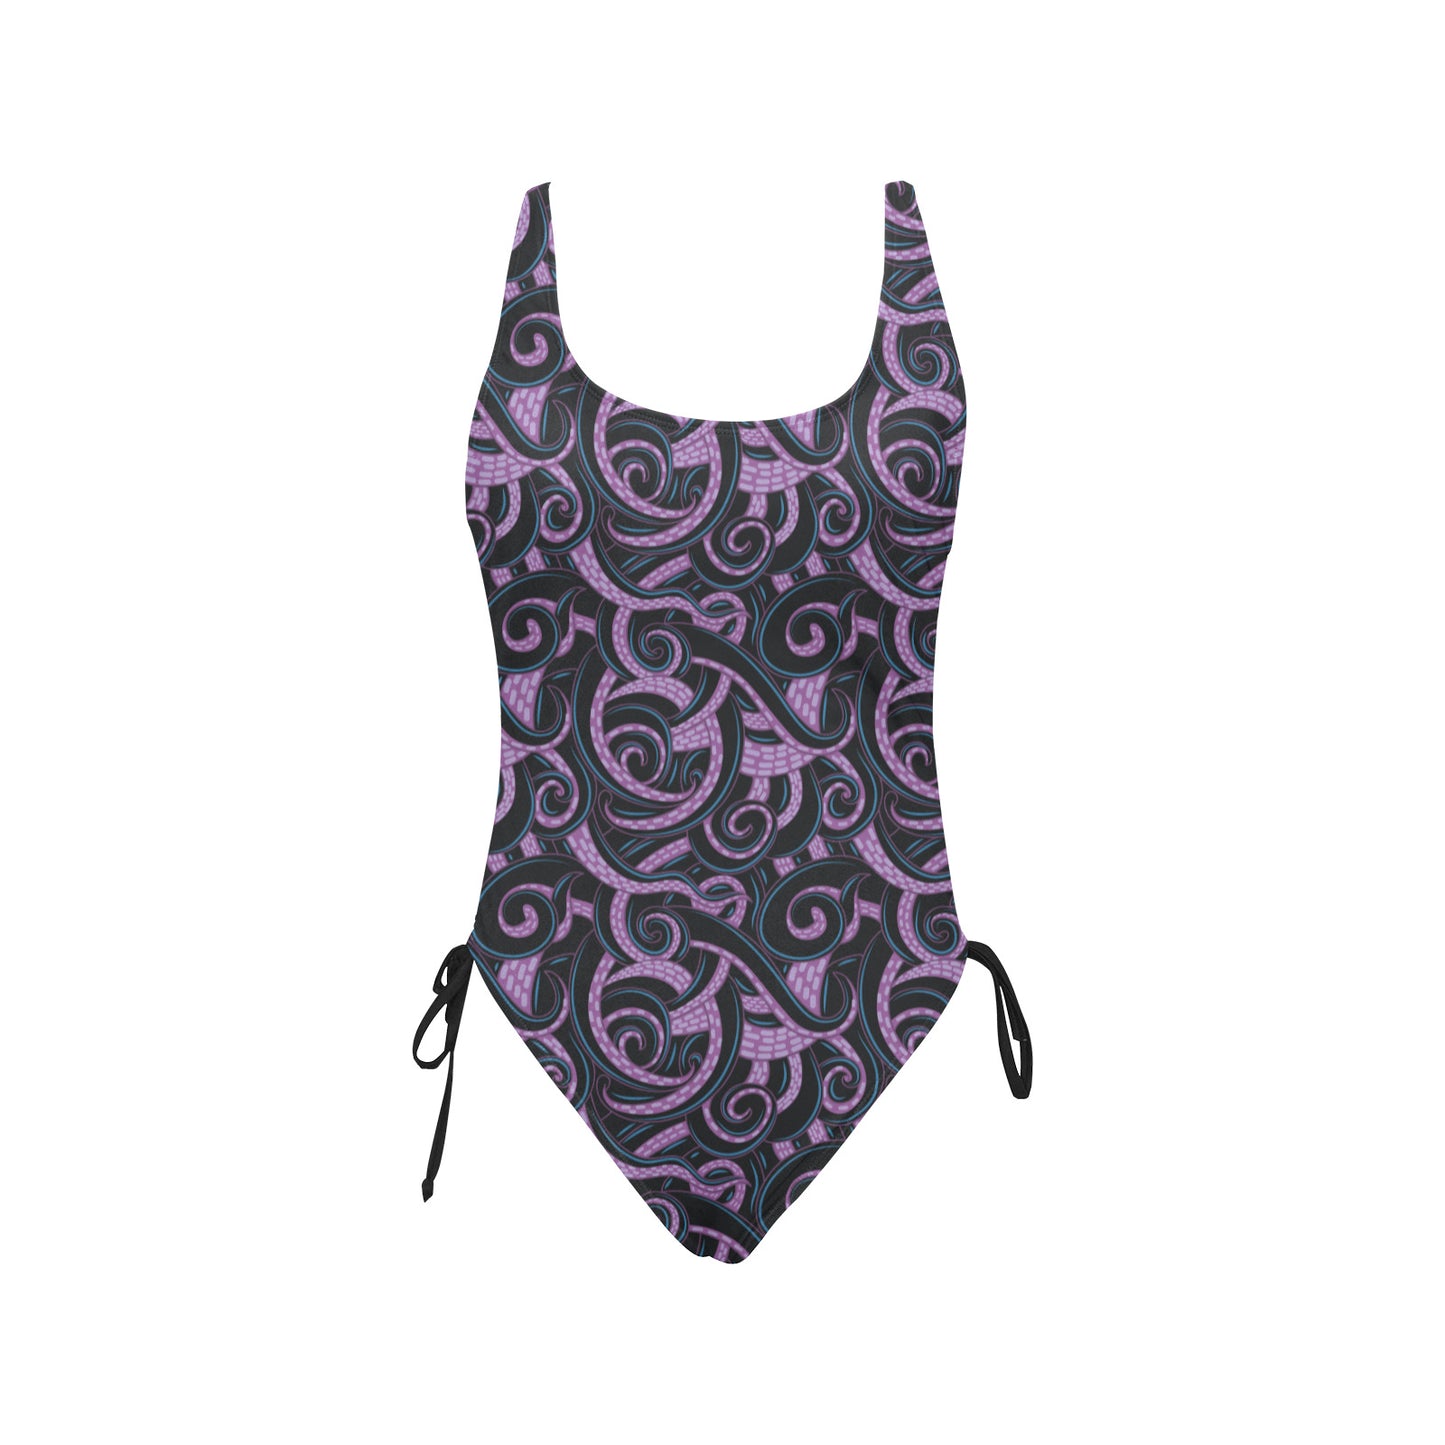 Ursula Tentacles Drawstring Side Women's One-Piece Swimsuit